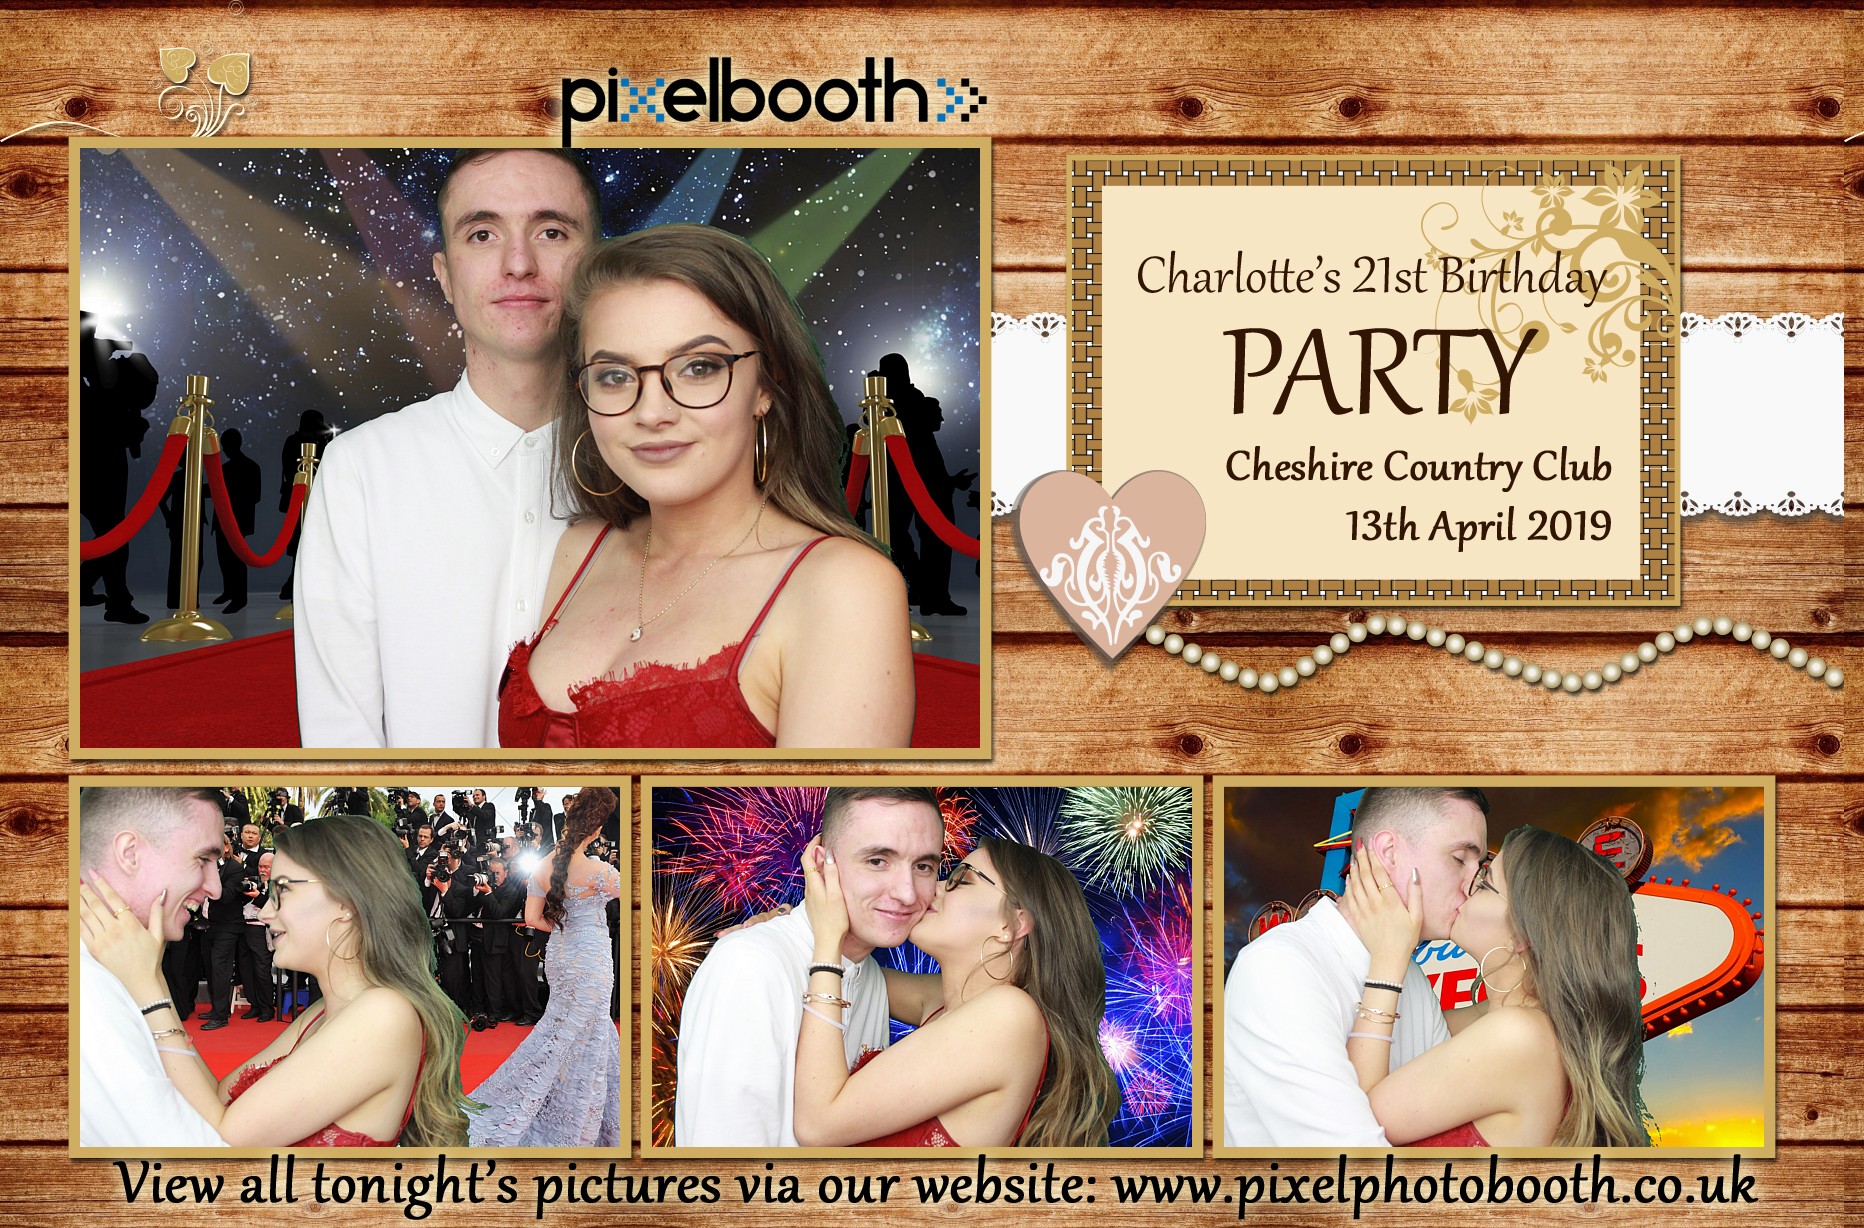 13th April 2019: Charlotte's 21st Birthday Party